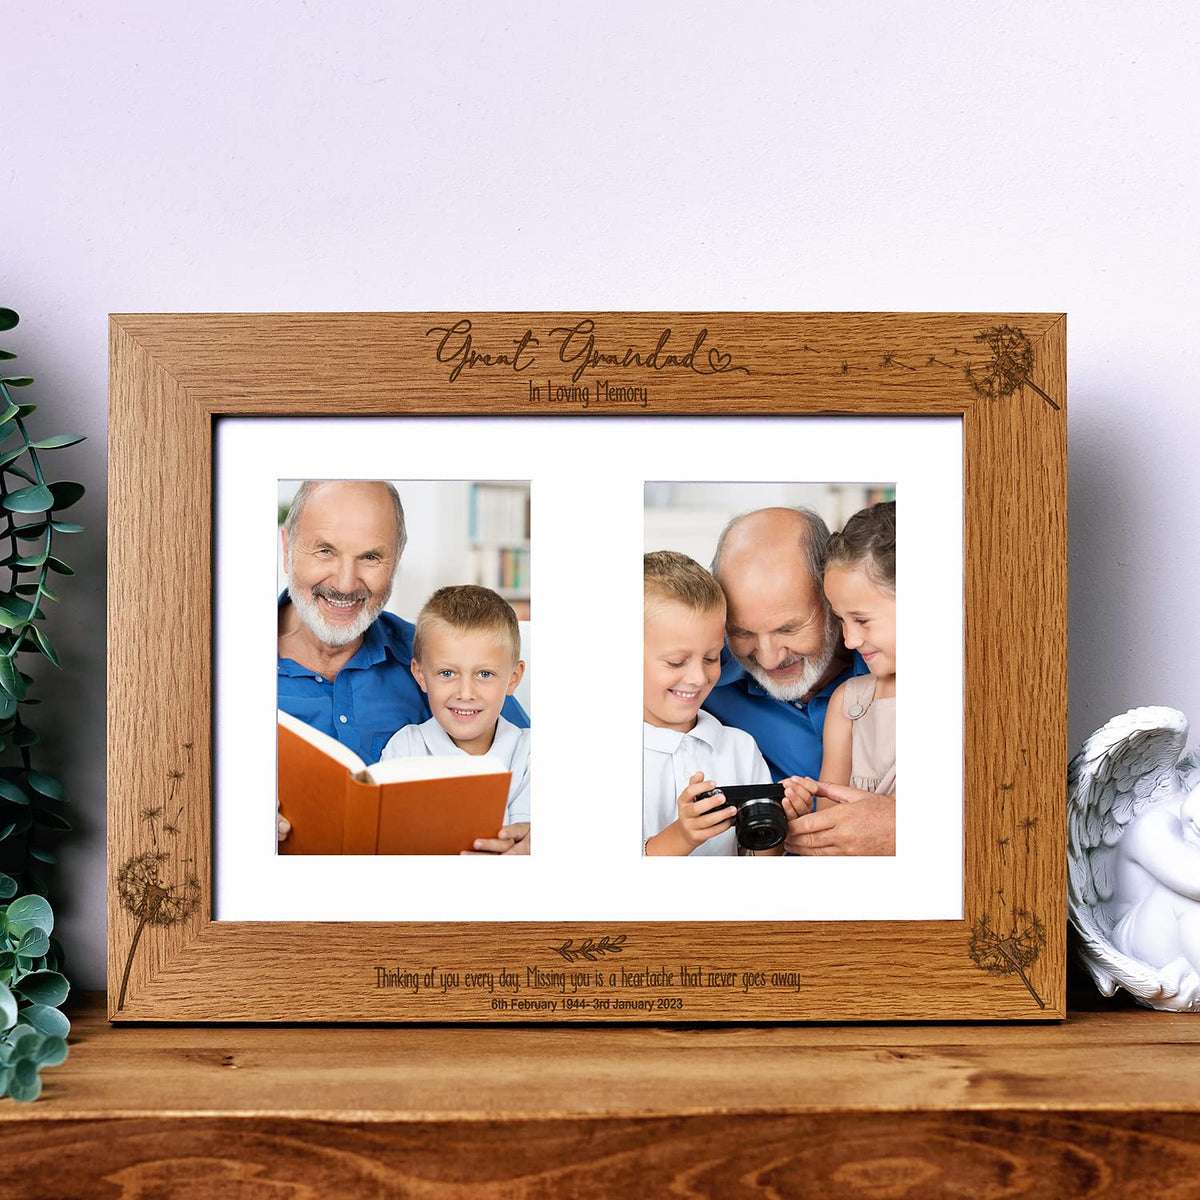 Great Grandad In Loving Memory Photo Frame Double 6x4 Inch Personalised